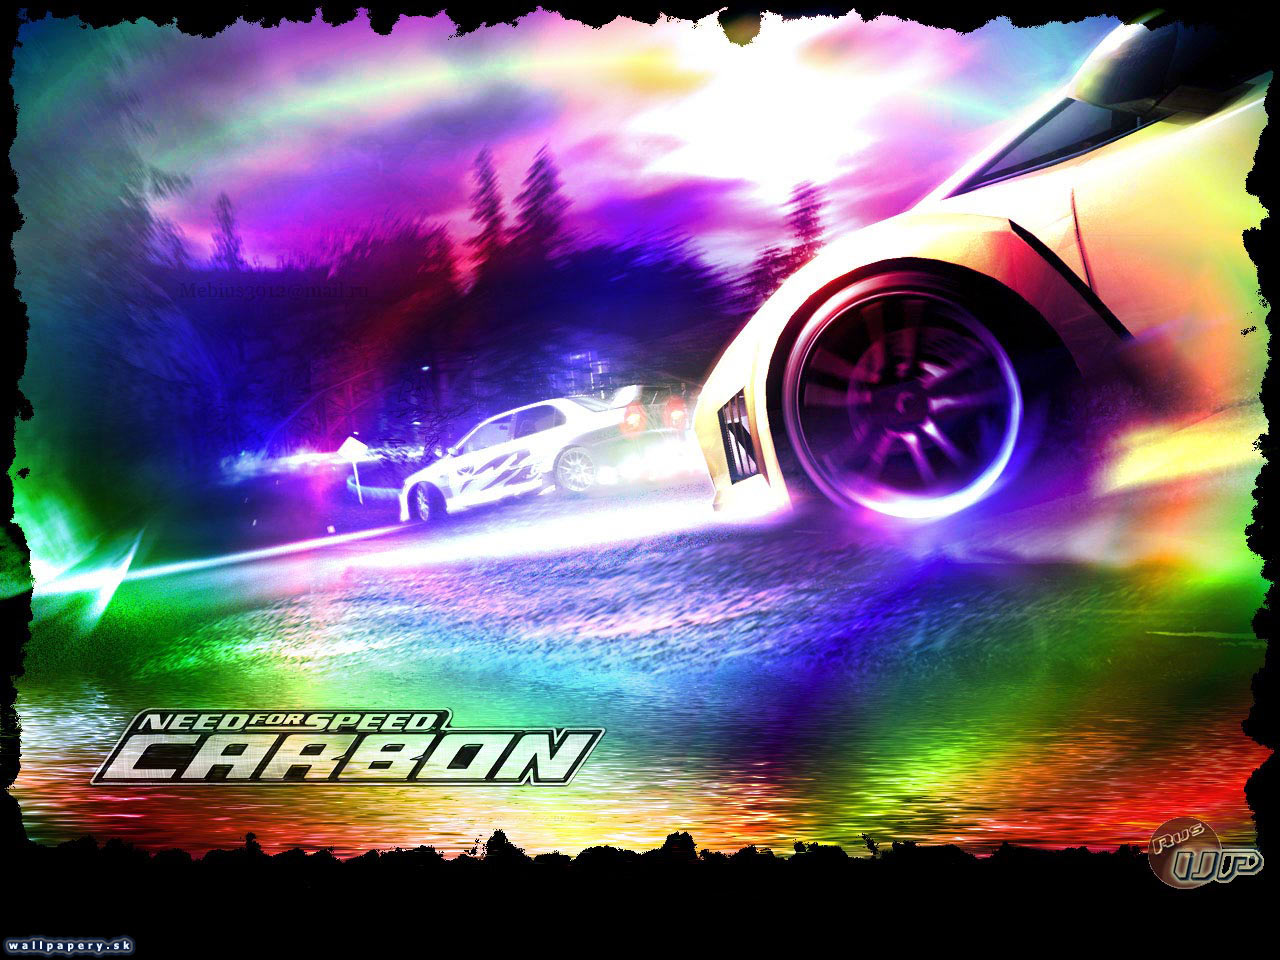 Need for Speed: Carbon - wallpaper 19